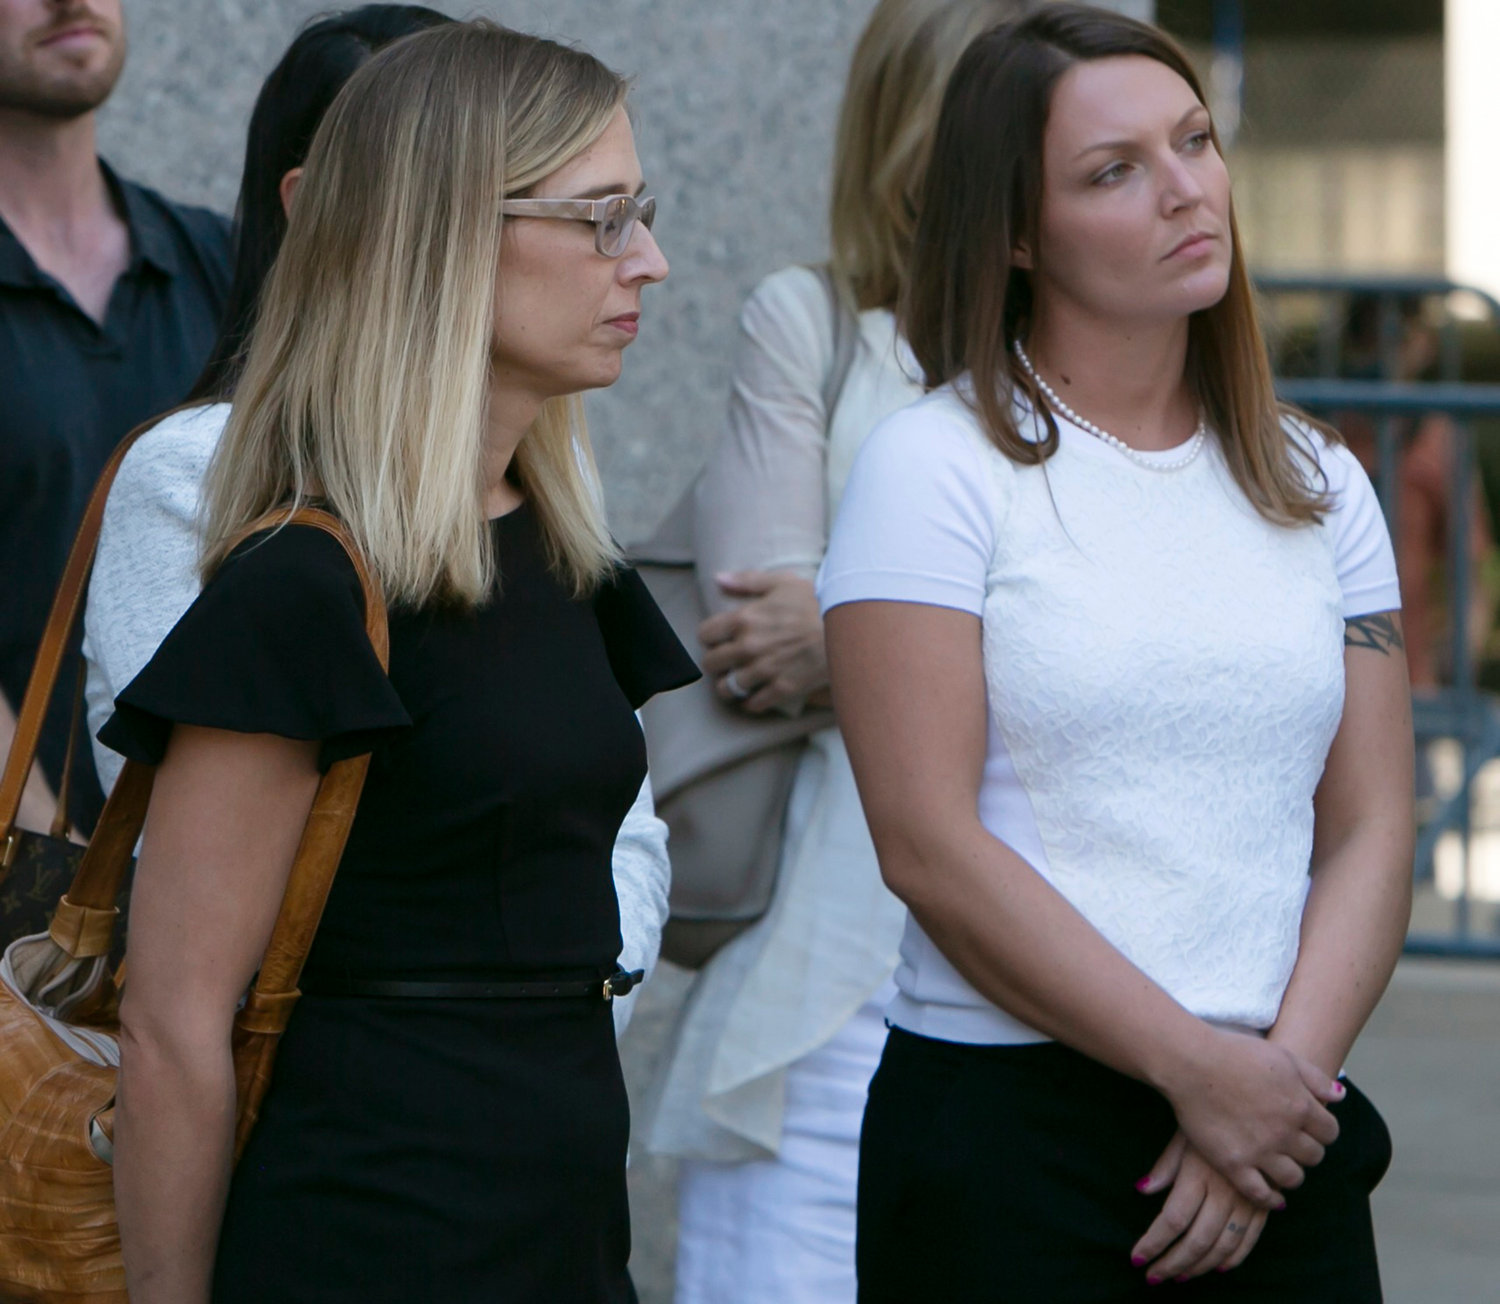 Annie Farmer, left, and Courtney Wild, right, who claimed they were molested by Jeffrey Epstein when they were teenagers, in a file photo from July 2019. (Emily Michot/Miami Herald/TNS)